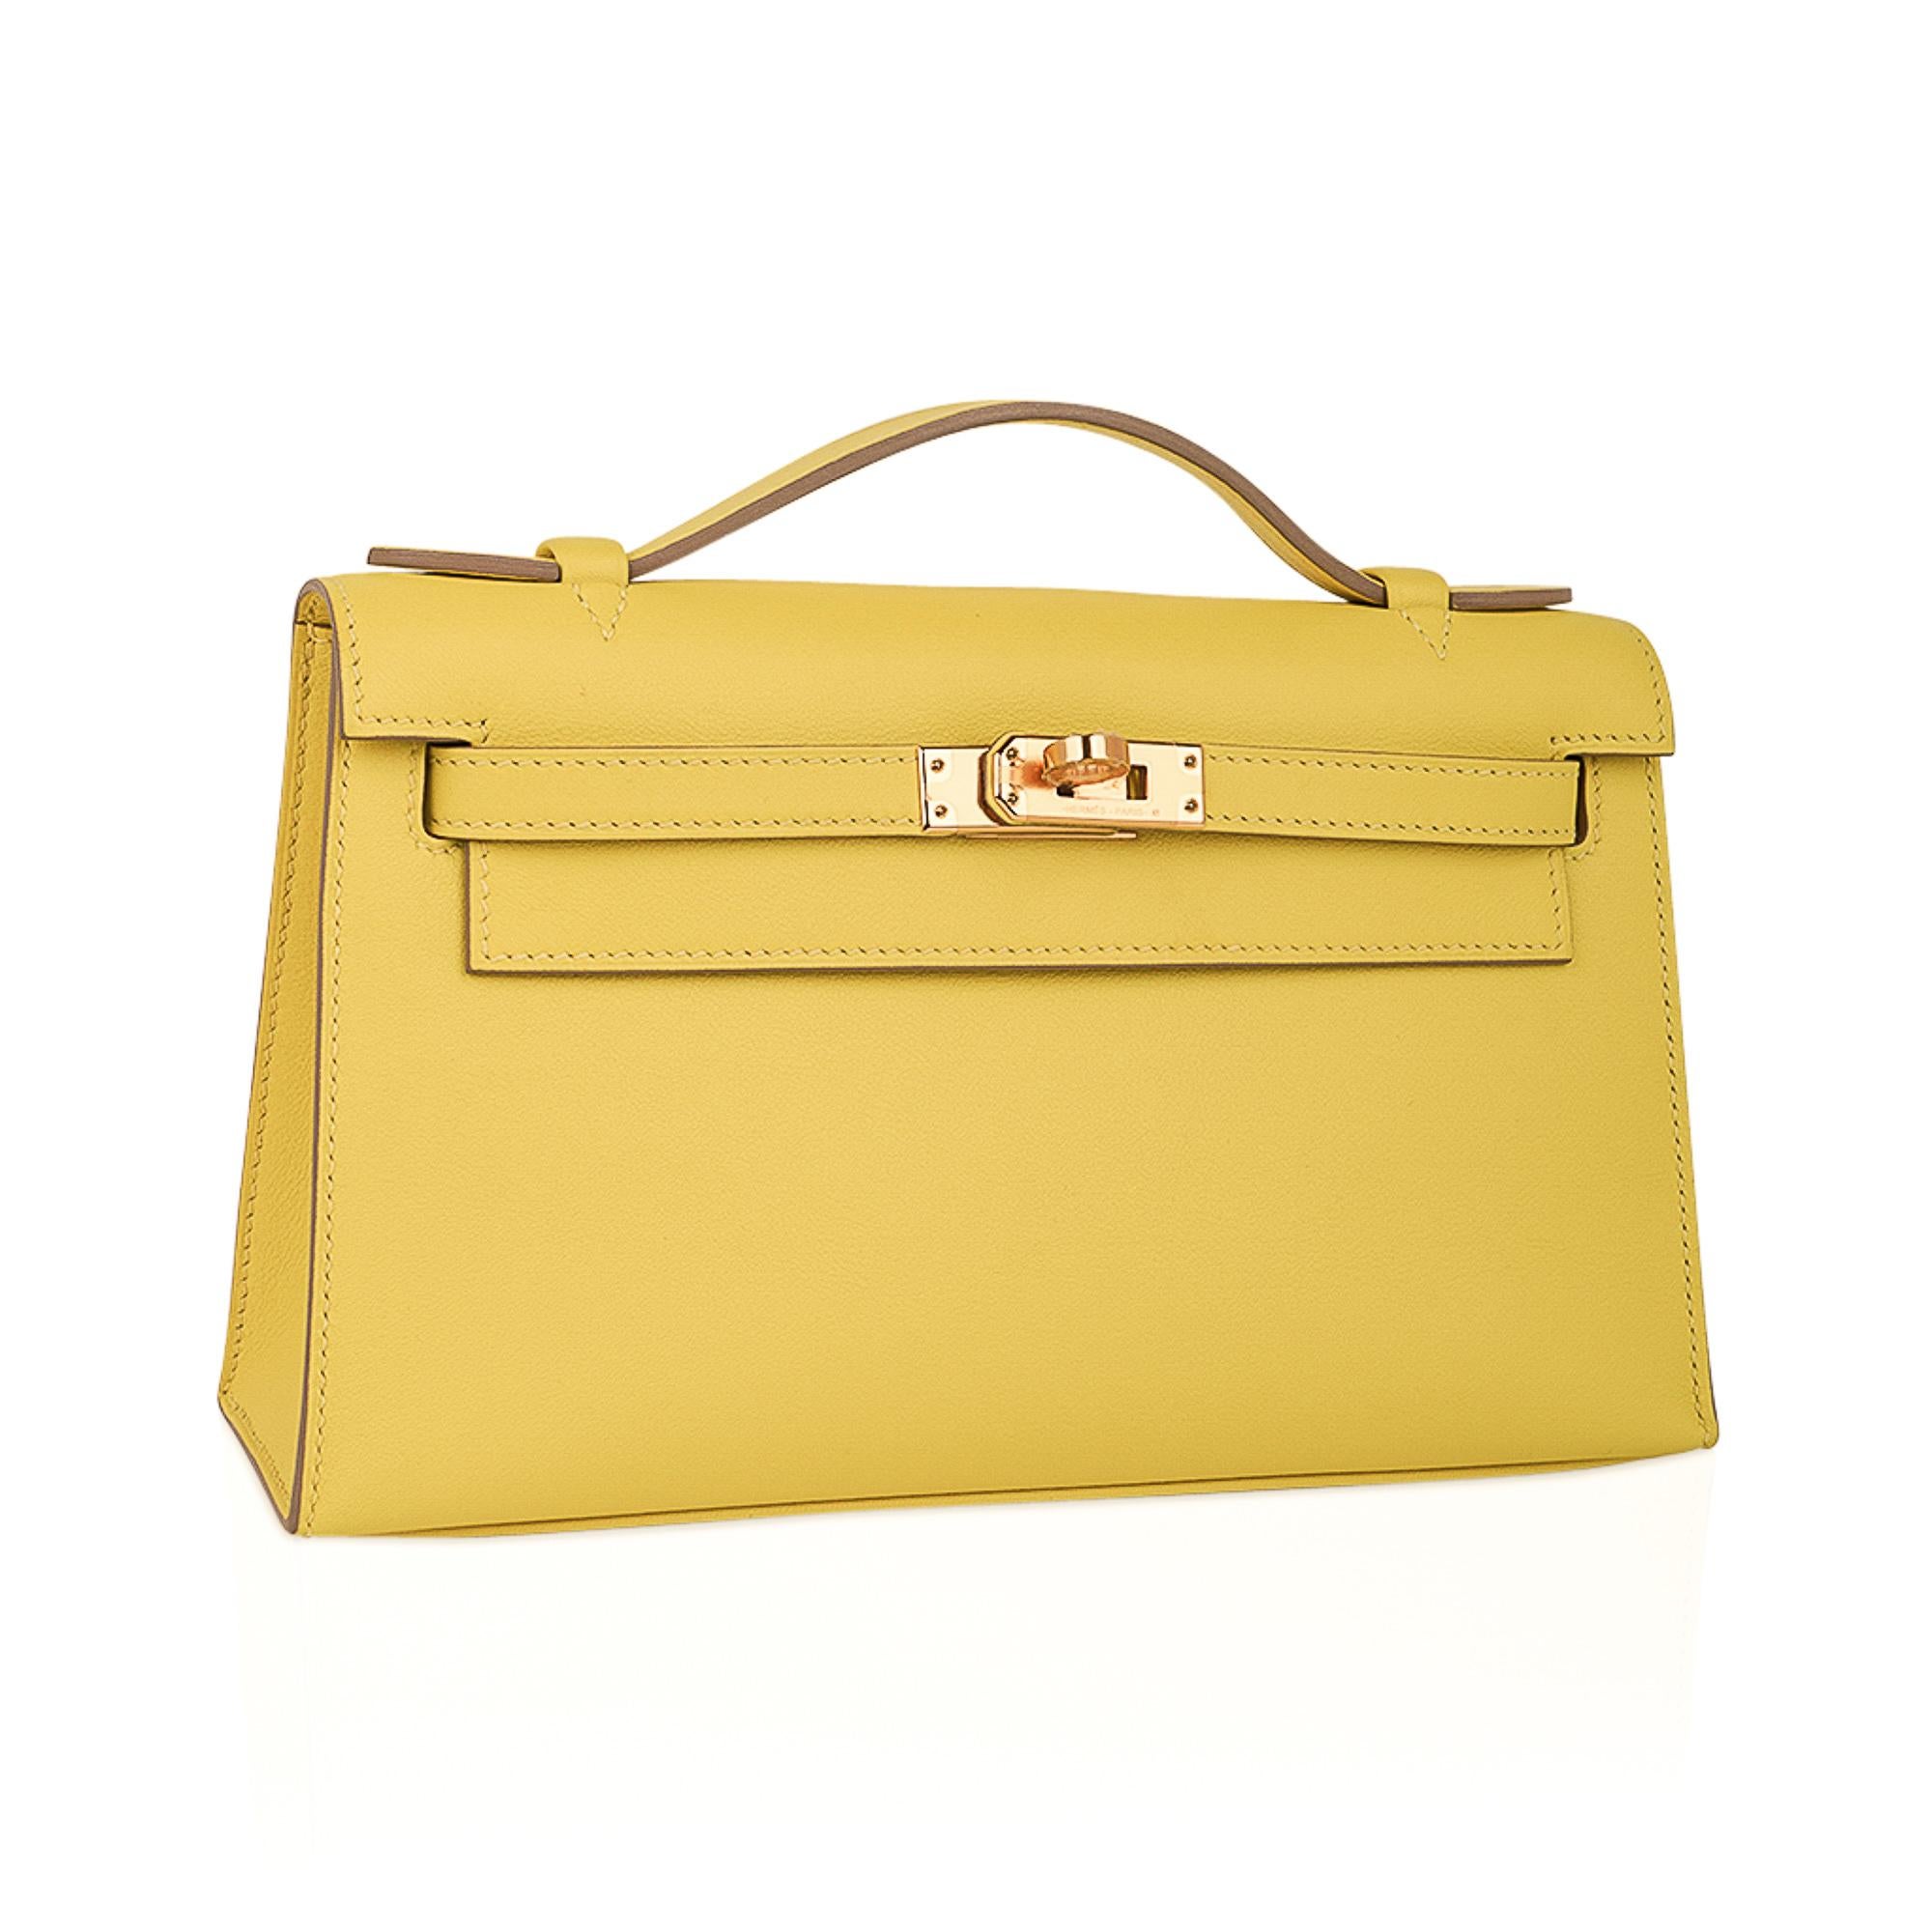 Mghtychic offer an Hermes Kelly pochette bag featured in vibrant Lime Swift leather.
This beautiful Hermes clutch is accentuated with gold hardware.
Very difficult to procure this fabulous Hermes clutch is a great find.
Signature stamp on